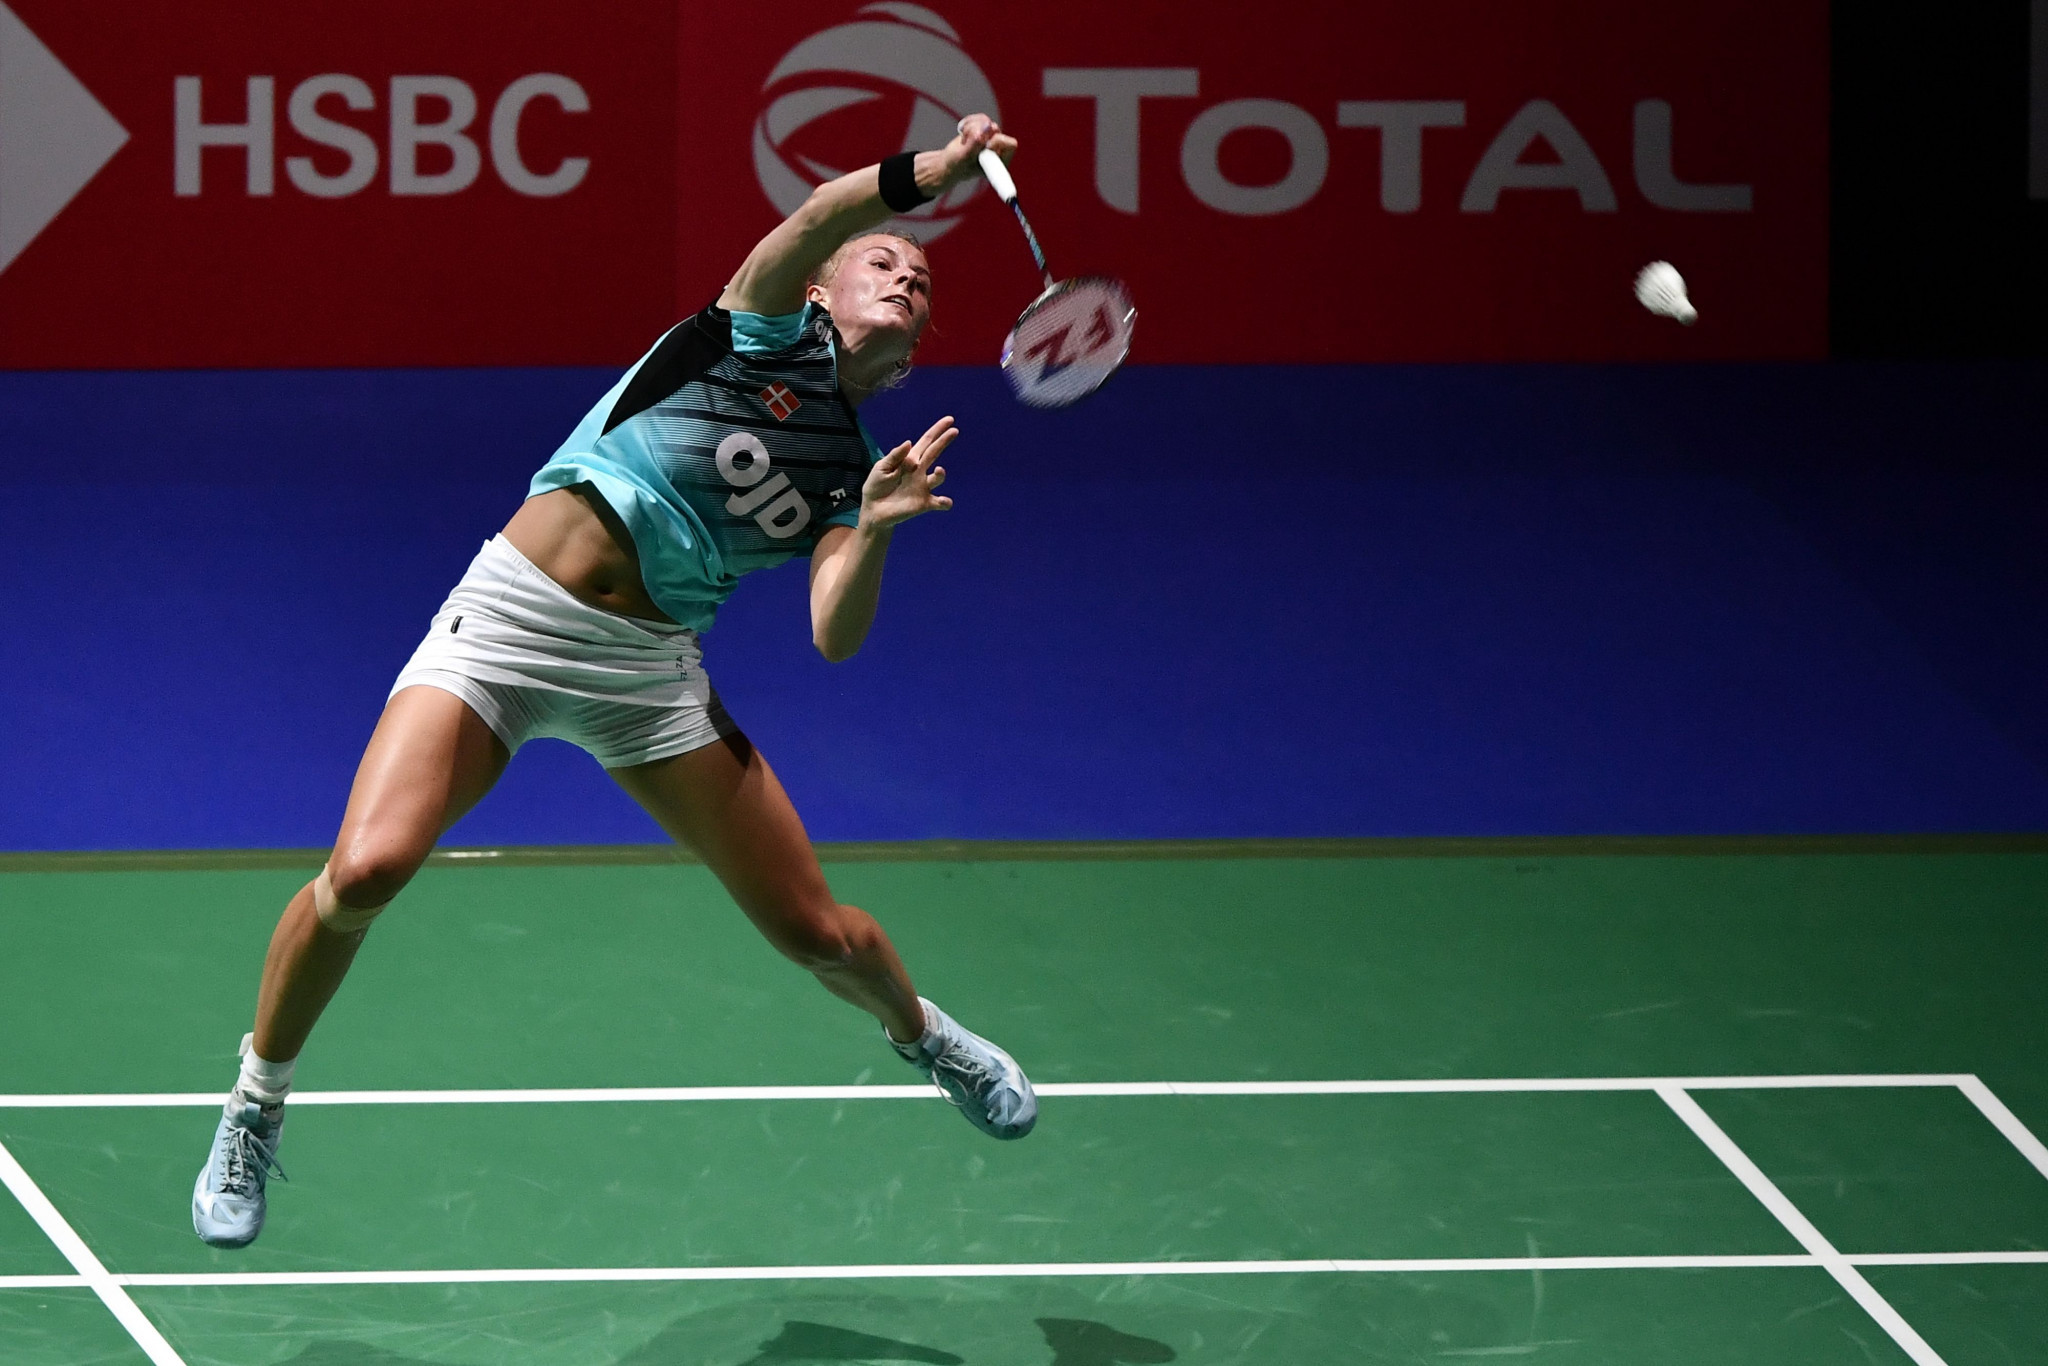 Mia Blichfeldt secured Denmark's second point of the European Mixed Team final after a straight games win against Qi Xuefei ©Getty Images